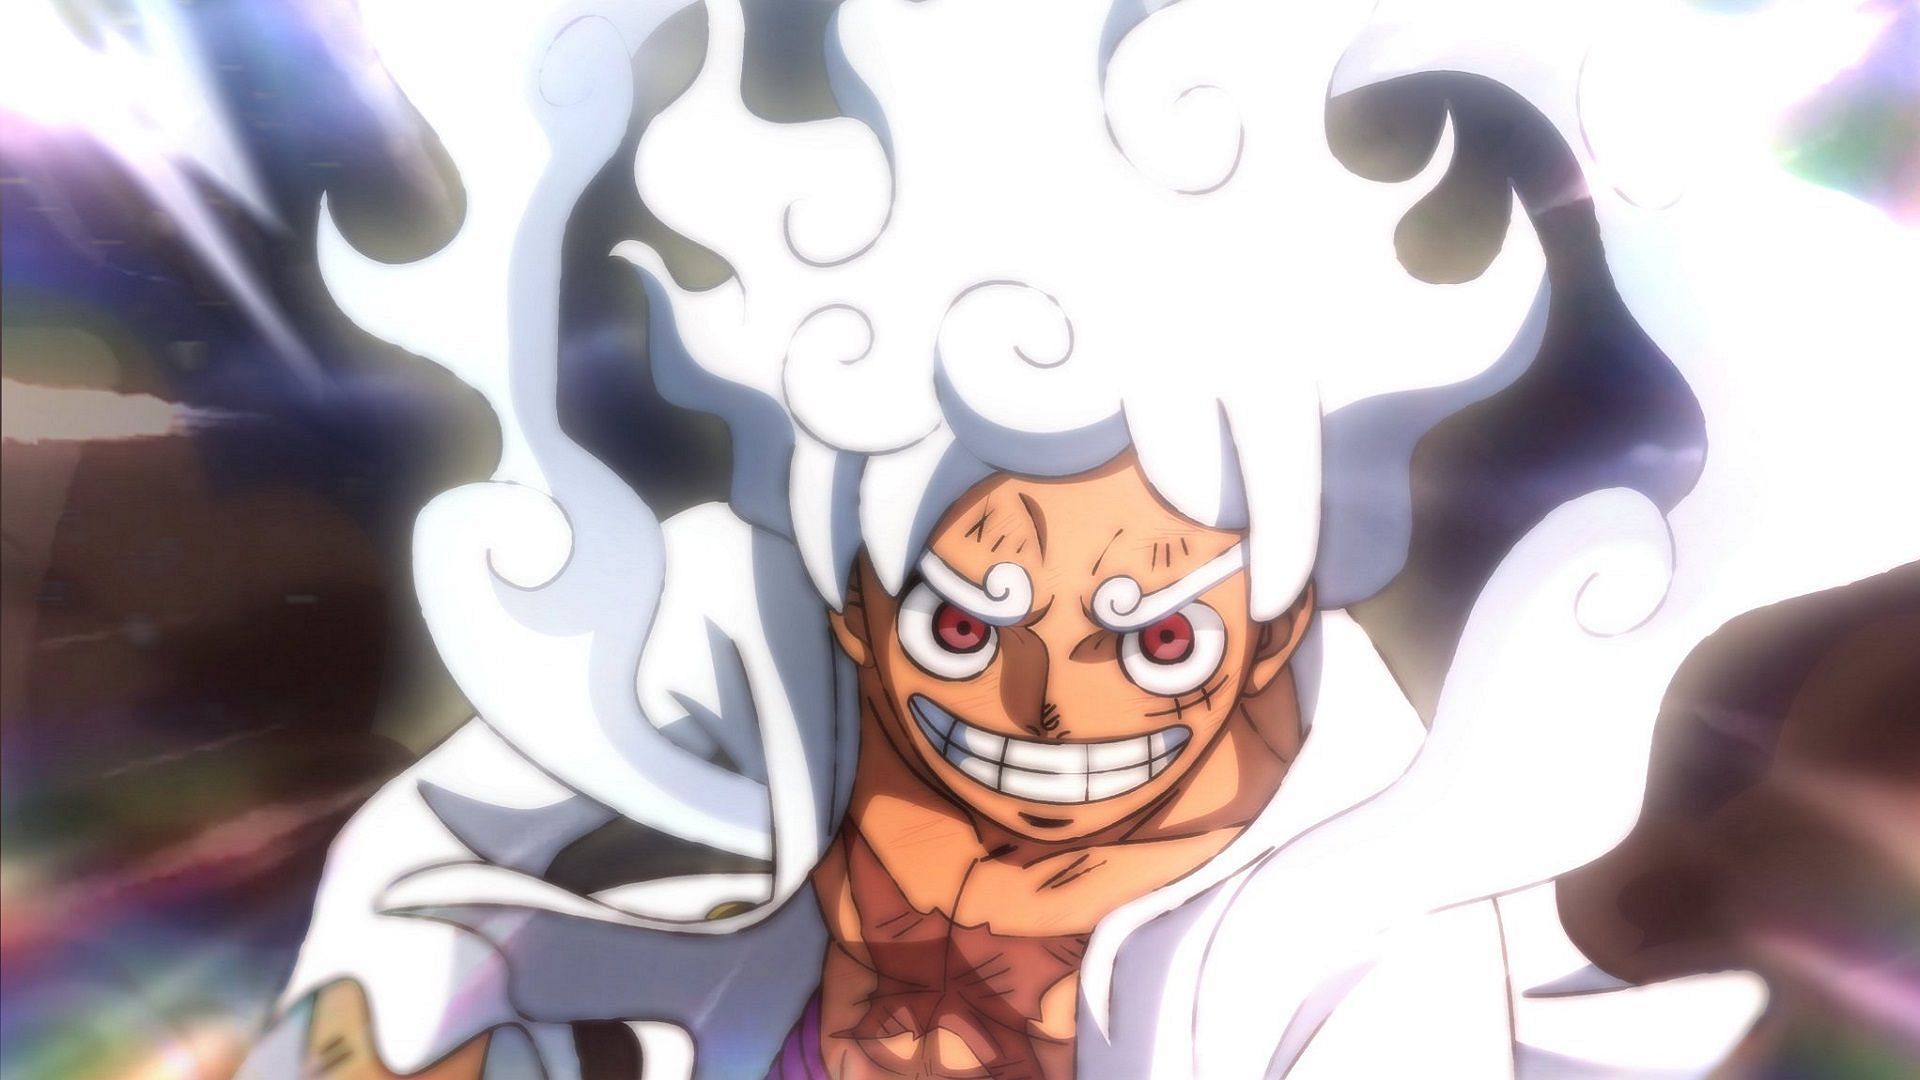 One Piece Anime Teases Luffy's Gear Fifth Form in New Easter Egg